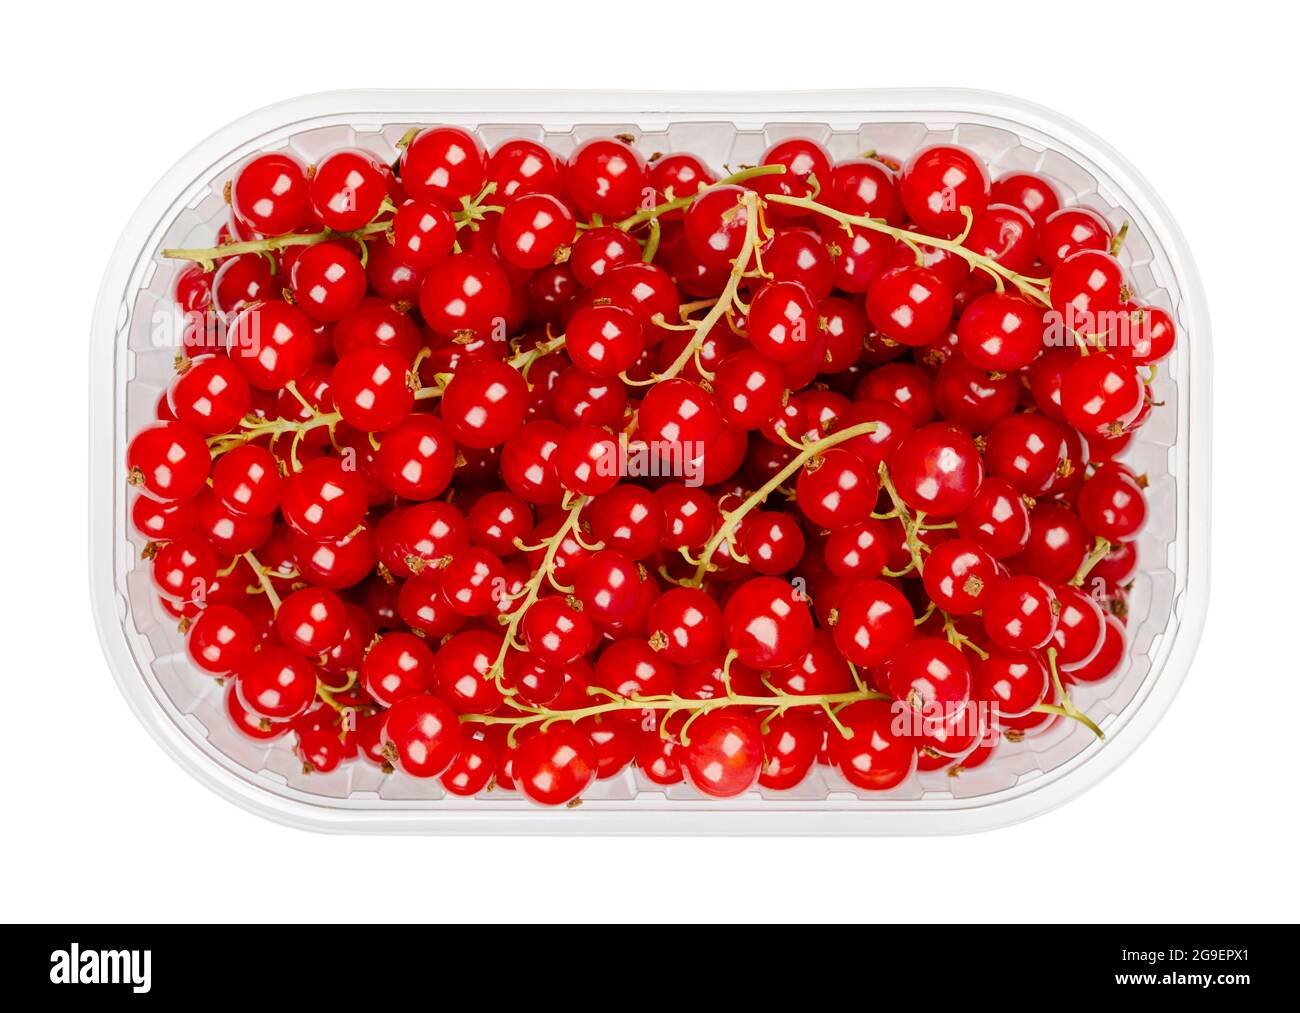 Redcurrant berries, in a plastic container. Fresh ripe red currant berries, spherical edible fruits of Ribes rubrum. Sweet fruits. Stock Photo